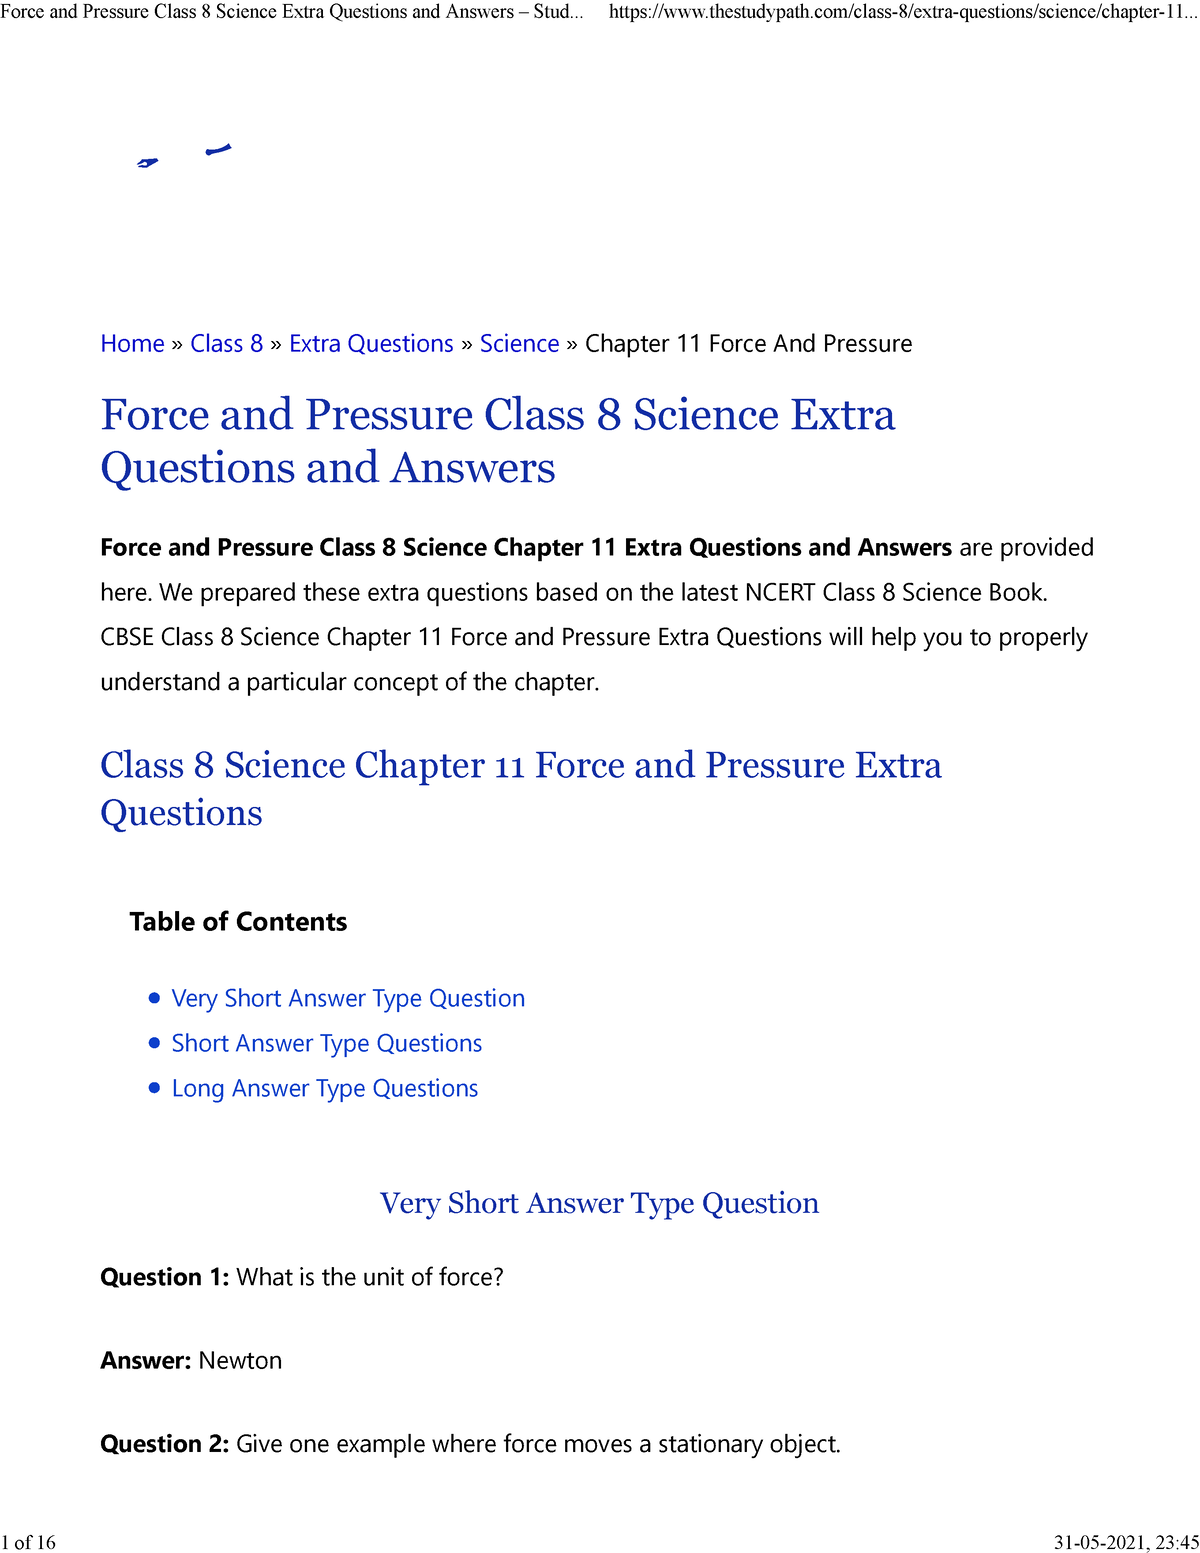 force-and-pressure-lecture-notes-1-10-home-class-8-extra-questions-science-chapter